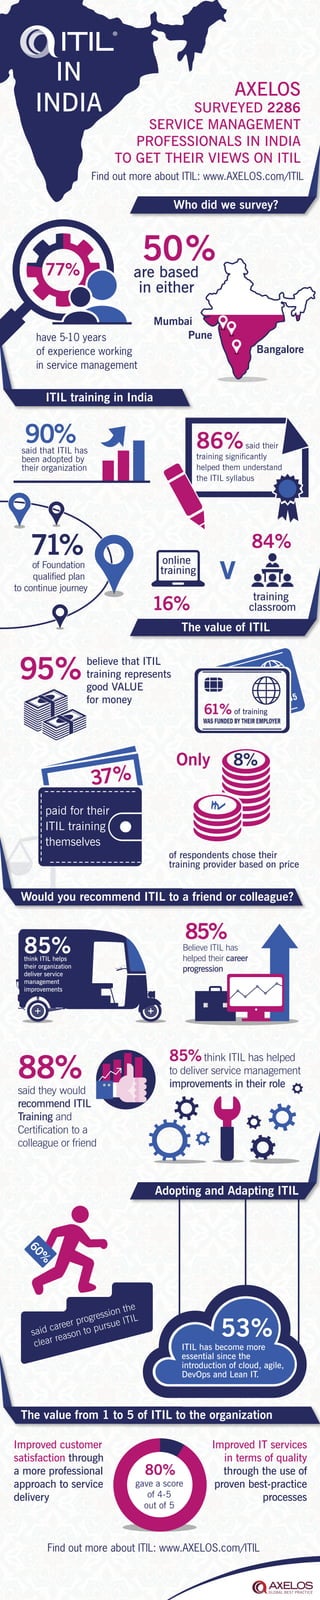 IN
INDIA
Adopting and Adapting ITIL
Would you recommend ITIL to a friend or colleague?
The value of ITIL
ITIL training in India
Who did we survey?
The value from 1 to 5 of ITIL to the organization
AXELOS
SURVEYED 2286
SERVICE MANAGEMENT
PROFESSIONALS IN INDIA
TO GET THEIR VIEWS ON ITIL
77%
v
training
classroom16%
online
training
84%
of Foundation
qualified plan
to continue journey
90%
said they would
recommend ITIL
Training and
Certification to a
colleague or friend
85%think ITIL has helped
to deliver service management
improvements in their role
85%think ITIL helps
their organization
deliver service
management
improvements
85%
80%
gave a score
of 4-5
out of 5
Improved customer
satisfaction through
a more professional
approach to service
delivery
Improved IT services
in terms of quality
through the use of
proven best-practice
processes
86%said their
training significantly
helped them understand
the ITIL syllabus
of respondents chose their
training provider based on price
Only 8%
paid for their
ITIL training
themselves
37%
61% of training
believe that ITIL
training represents
good VALUE
for money
Bangalore
are based
in either
95%
have 5-10 years
of experience working
in service management
said that ITIL has
been adopted by
their organization
Believe ITIL has
helped their career
progression
71%
Mumbai
Pune
88%
said career progression the
clear reason to pursue ITIL
60%
Find out more about ITIL: www.AXELOS.com/ITIL
Find out more about ITIL: www.AXELOS.com/ITIL
53%
ITIL has become more
essential since the
introduction of cloud, agile,
DevOps and Lean IT.
 